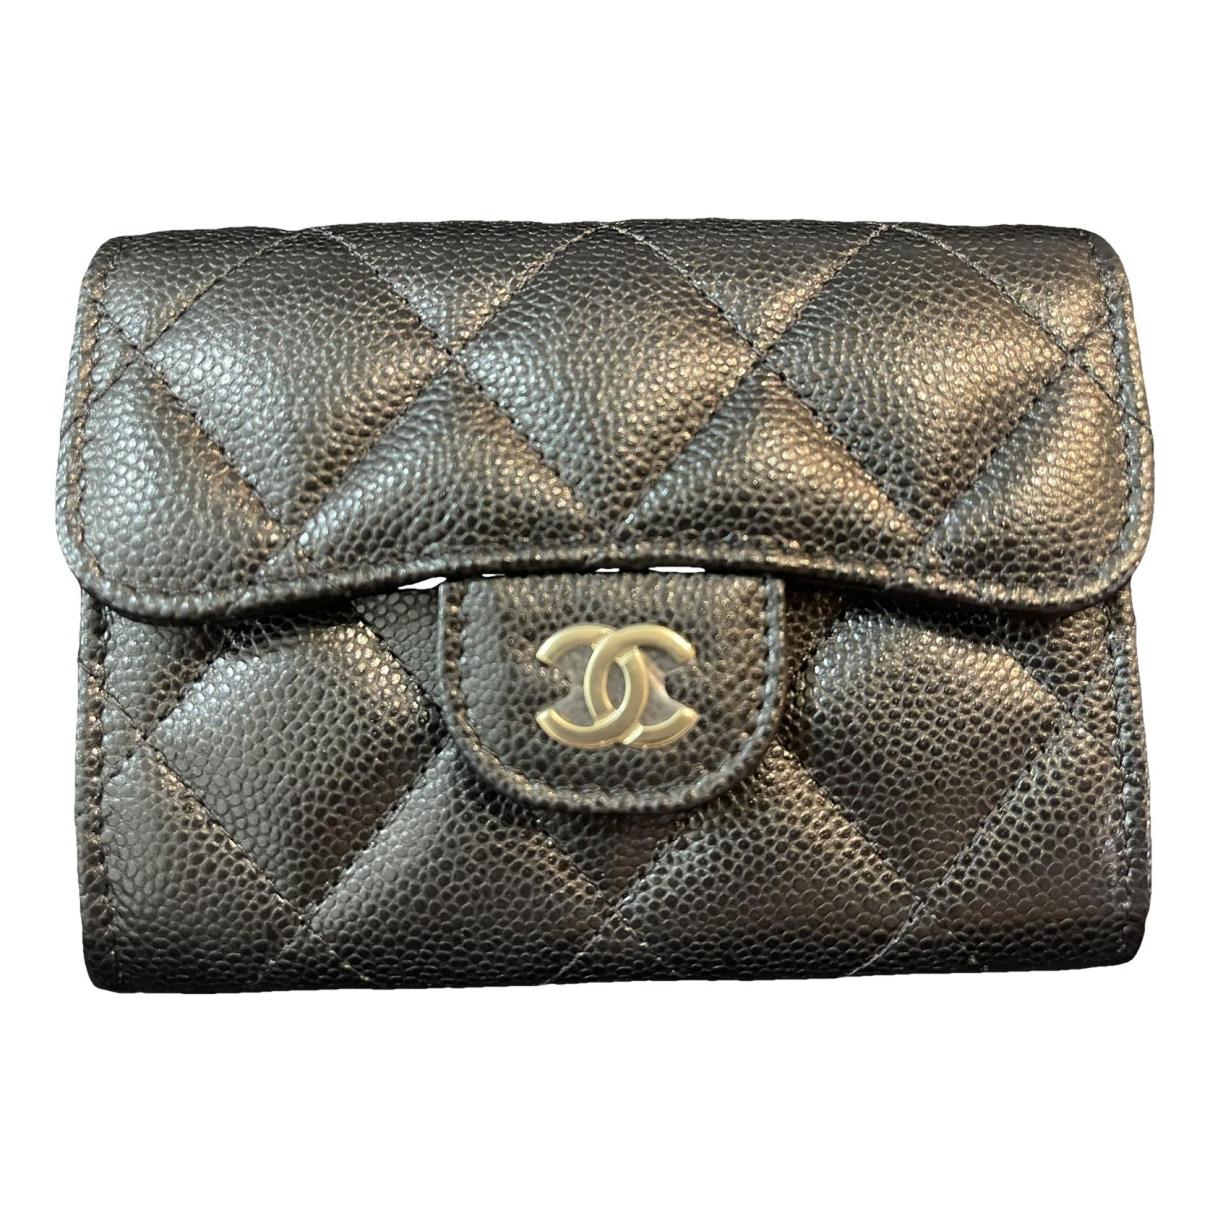 PRELOVED Chanel 19 Black Quilted Leather Card Holder 31625212 061623 –  KimmieBBags LLC